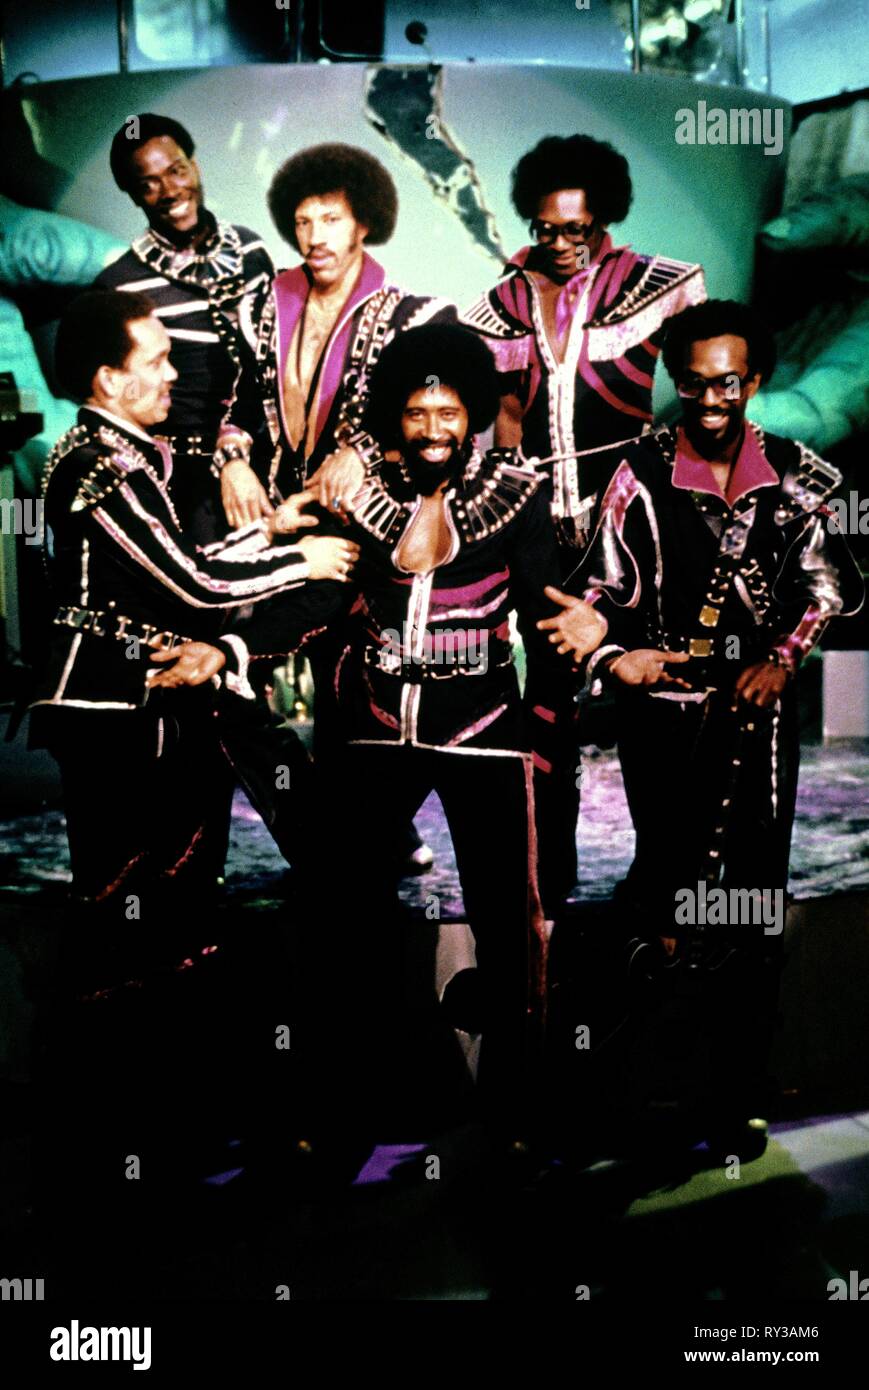 RICHIE,COMMODORES, THANK GOD IT'S FRIDAY, 1978 Stock Photo - Alamy